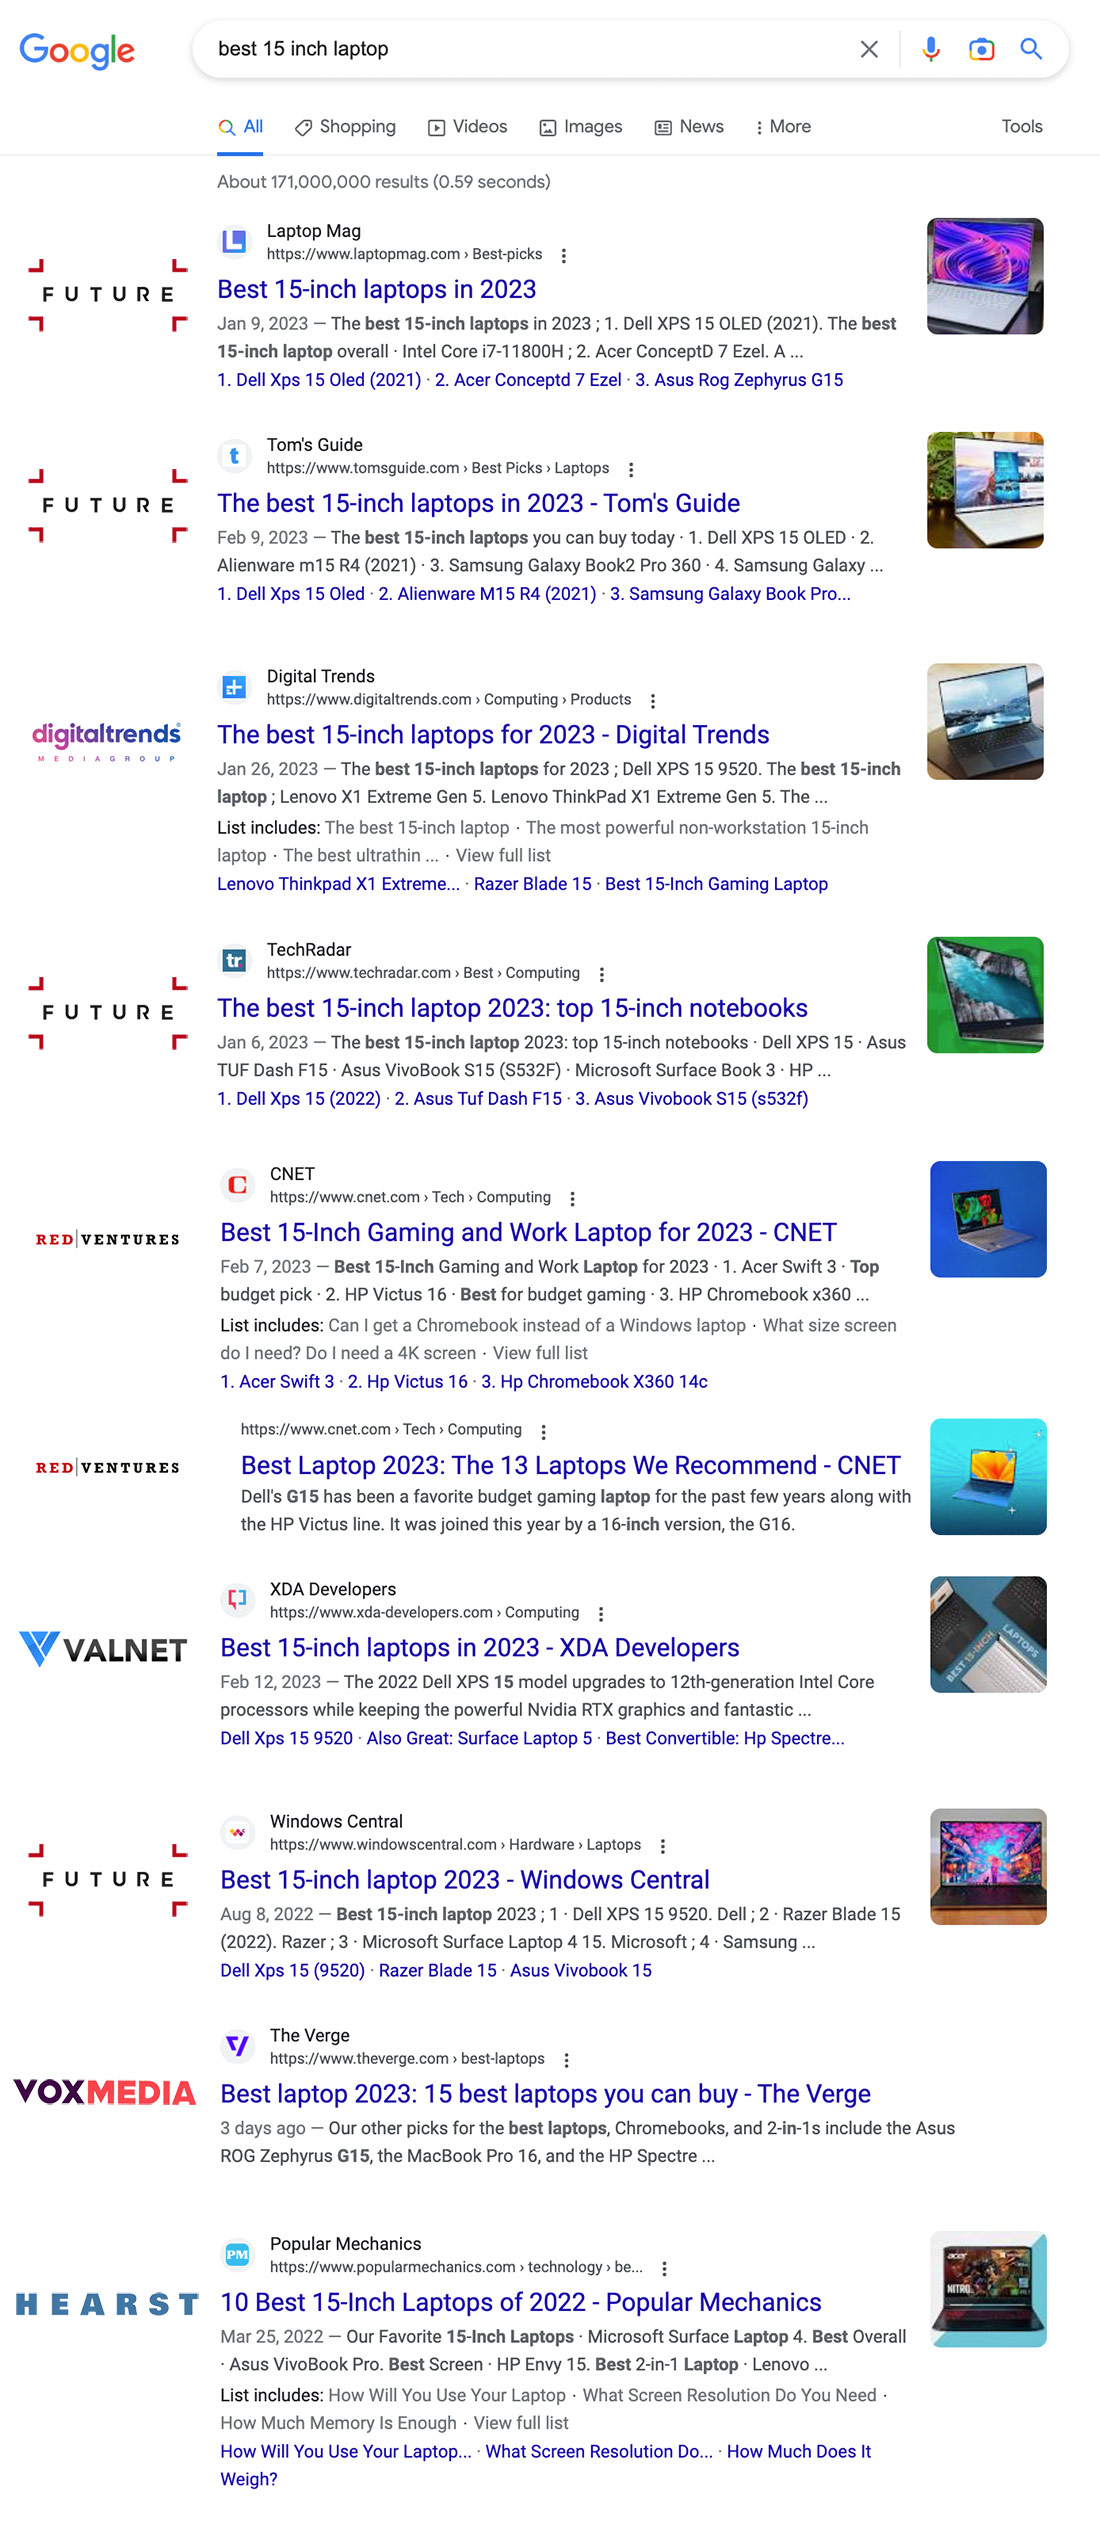 How 16 Companies are Dominating the World's Google Search Results